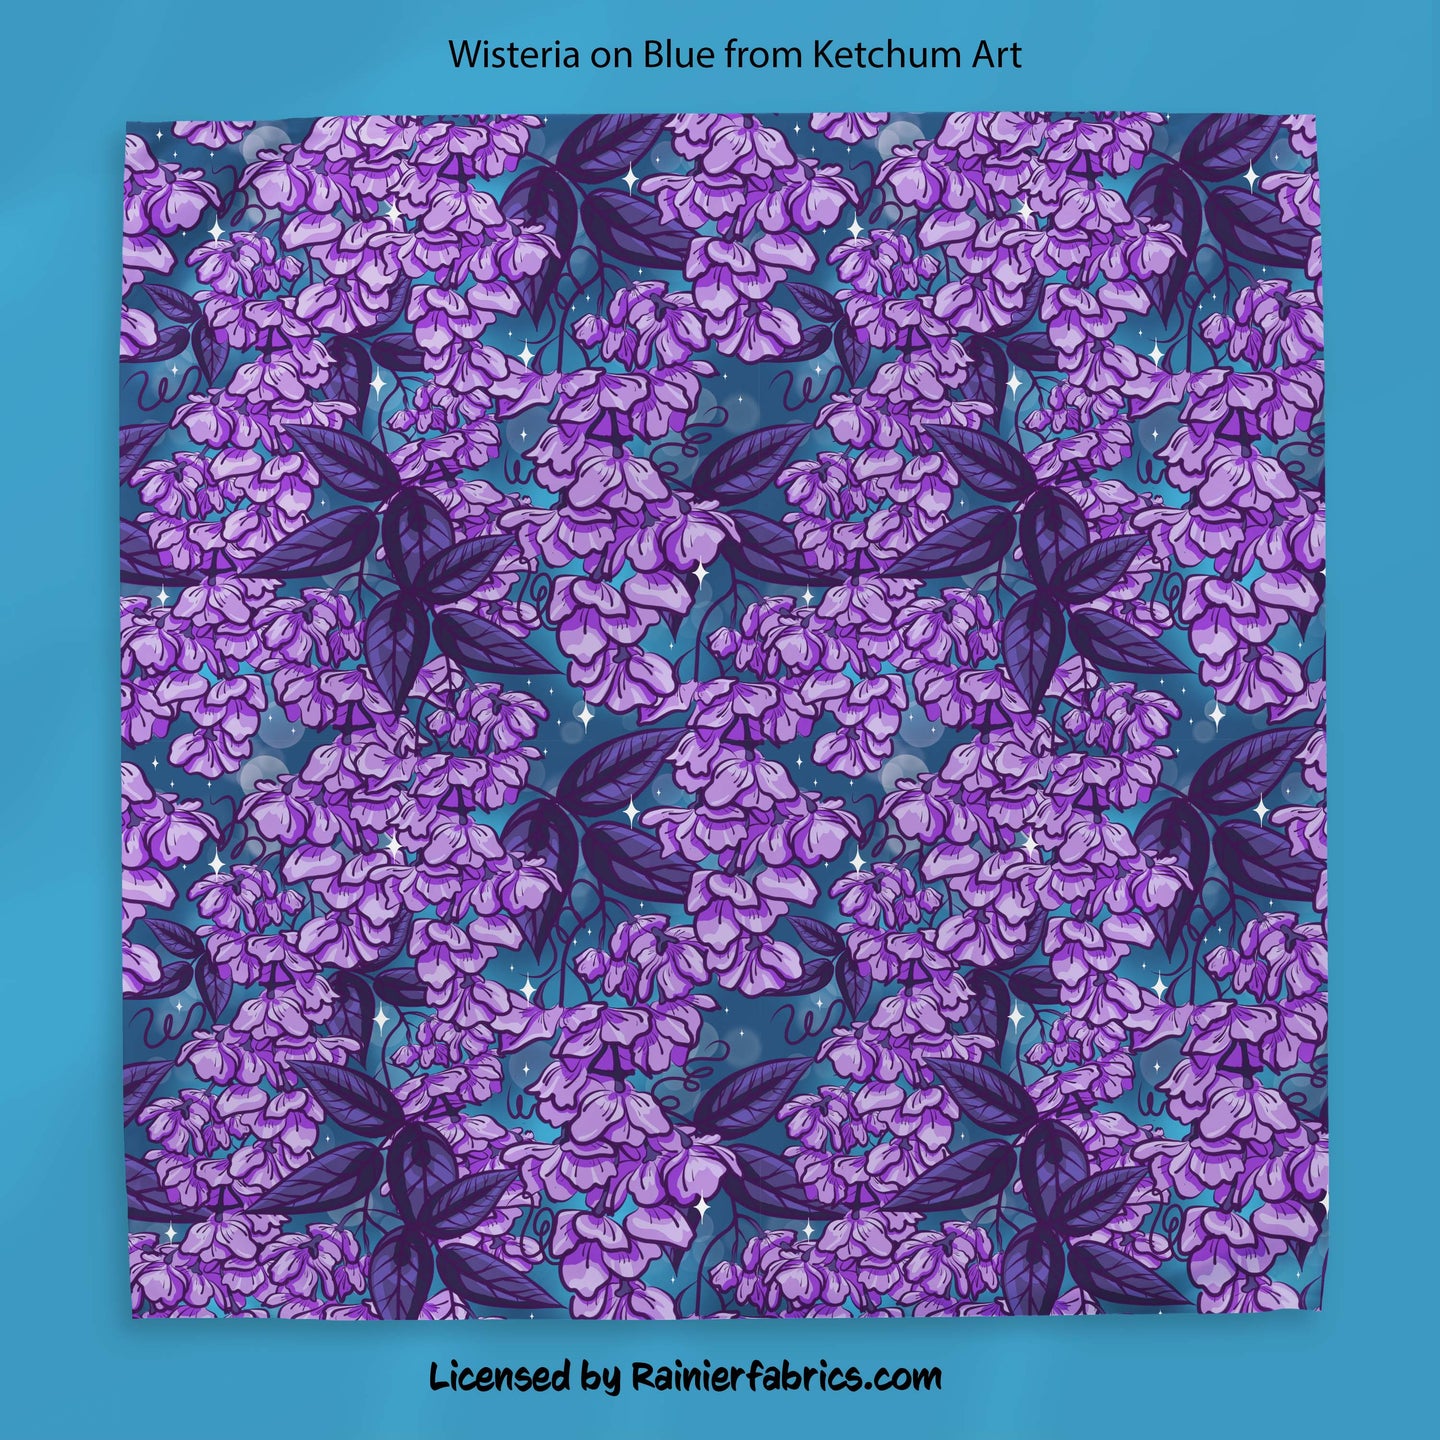 Wisteria in Blue by Ketchum Design - 2-5 business days to ship - Order by 1/2 yard